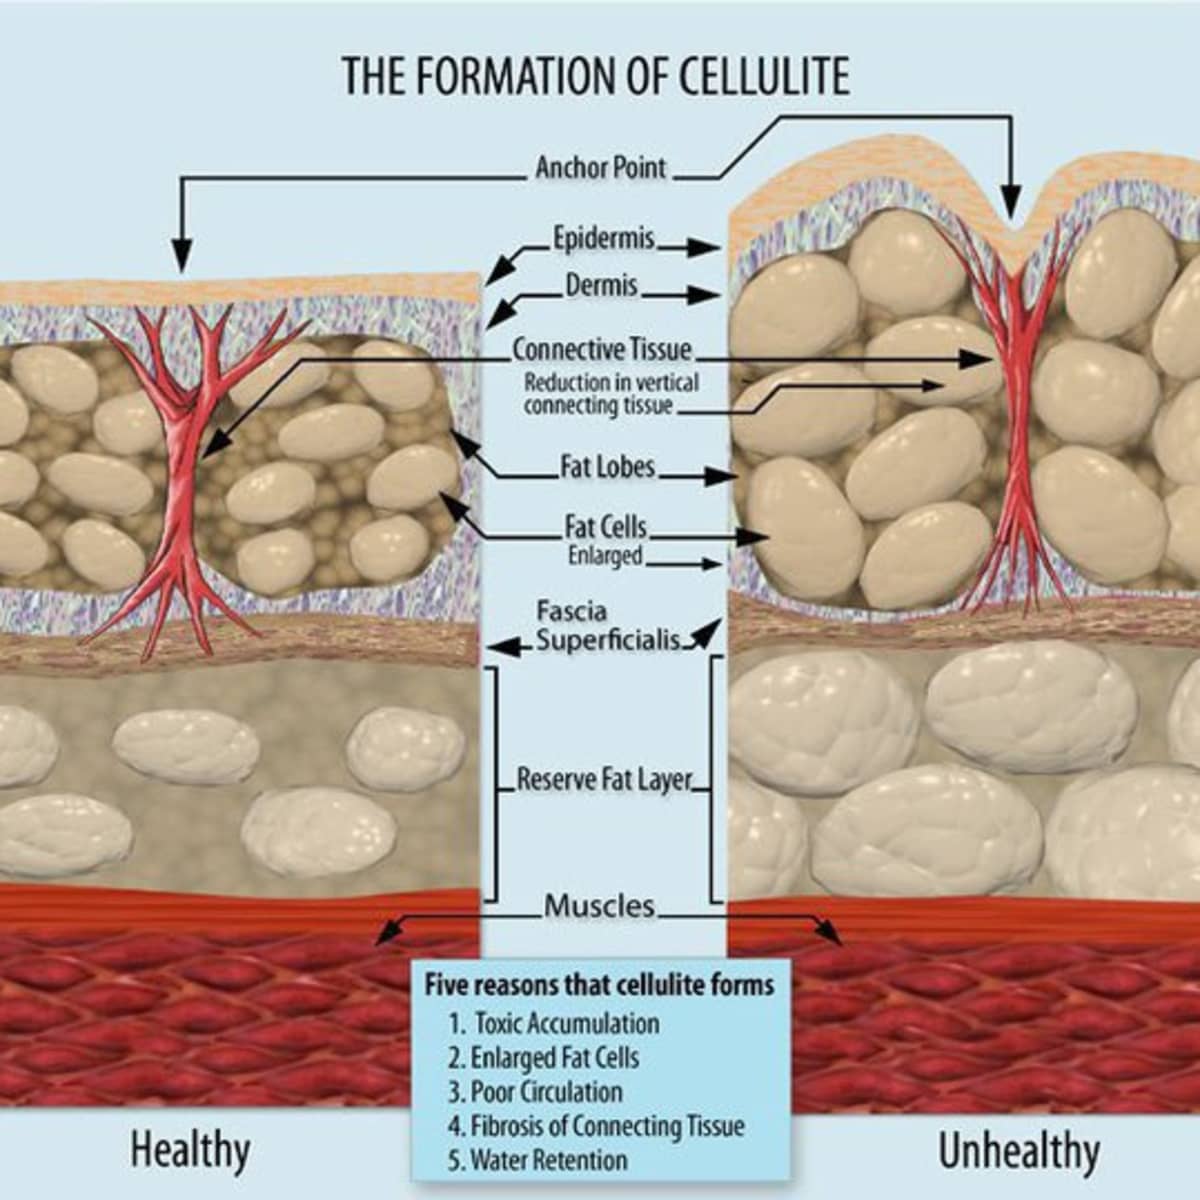 7 ways to reduce cellulite quickly and easily - abloomnova